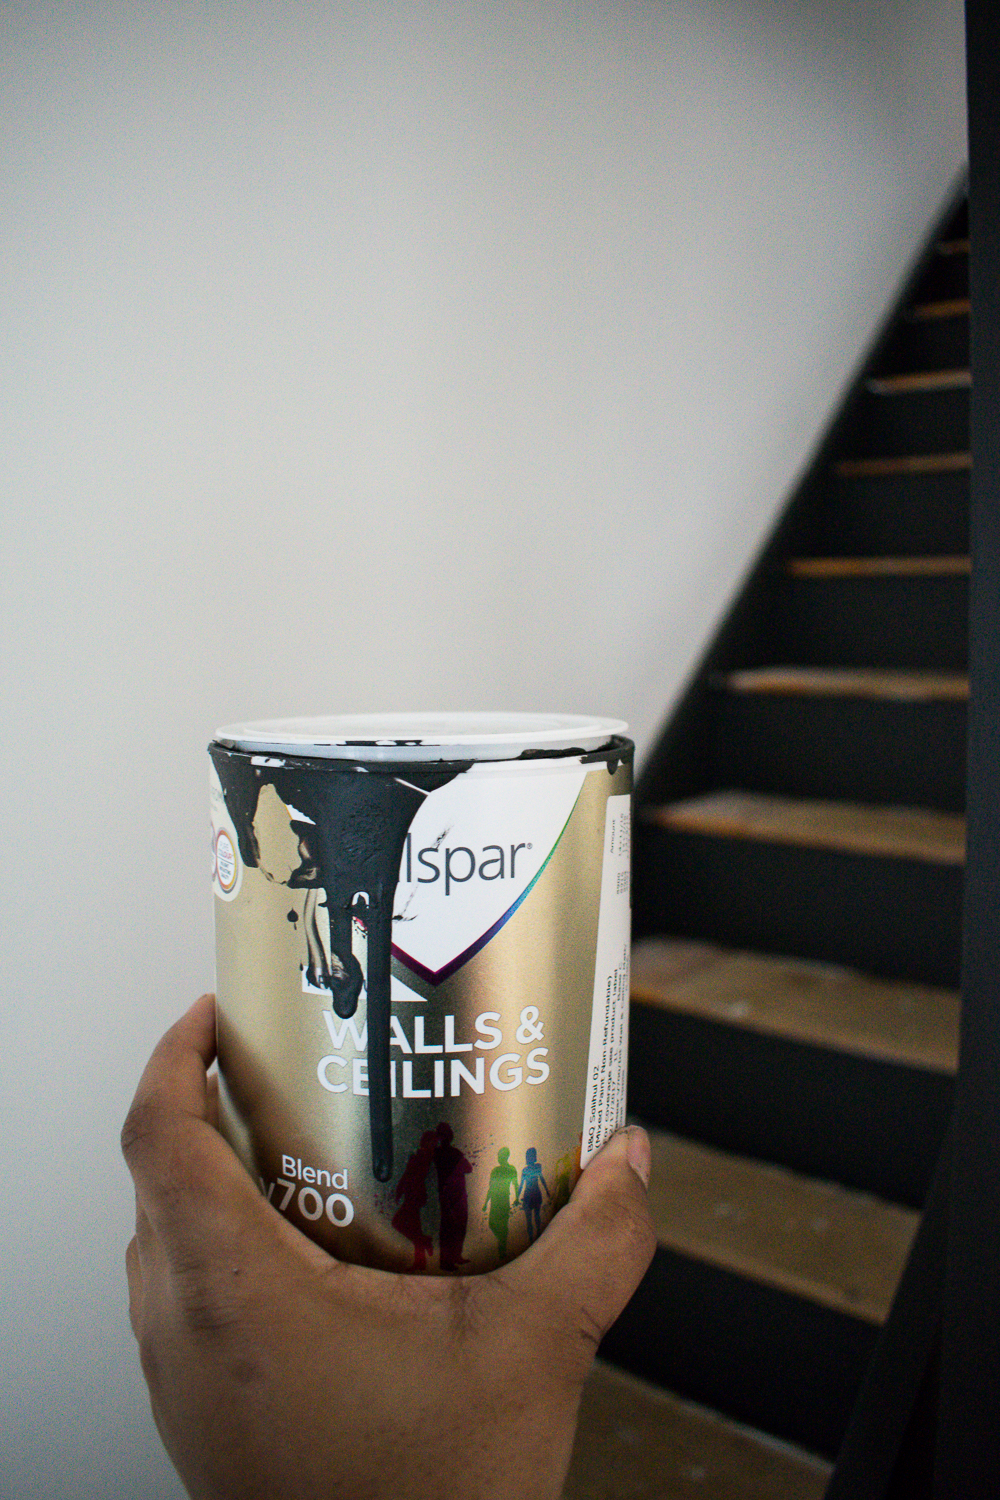 Image of me holding can of vaslpar paint next to the stairs